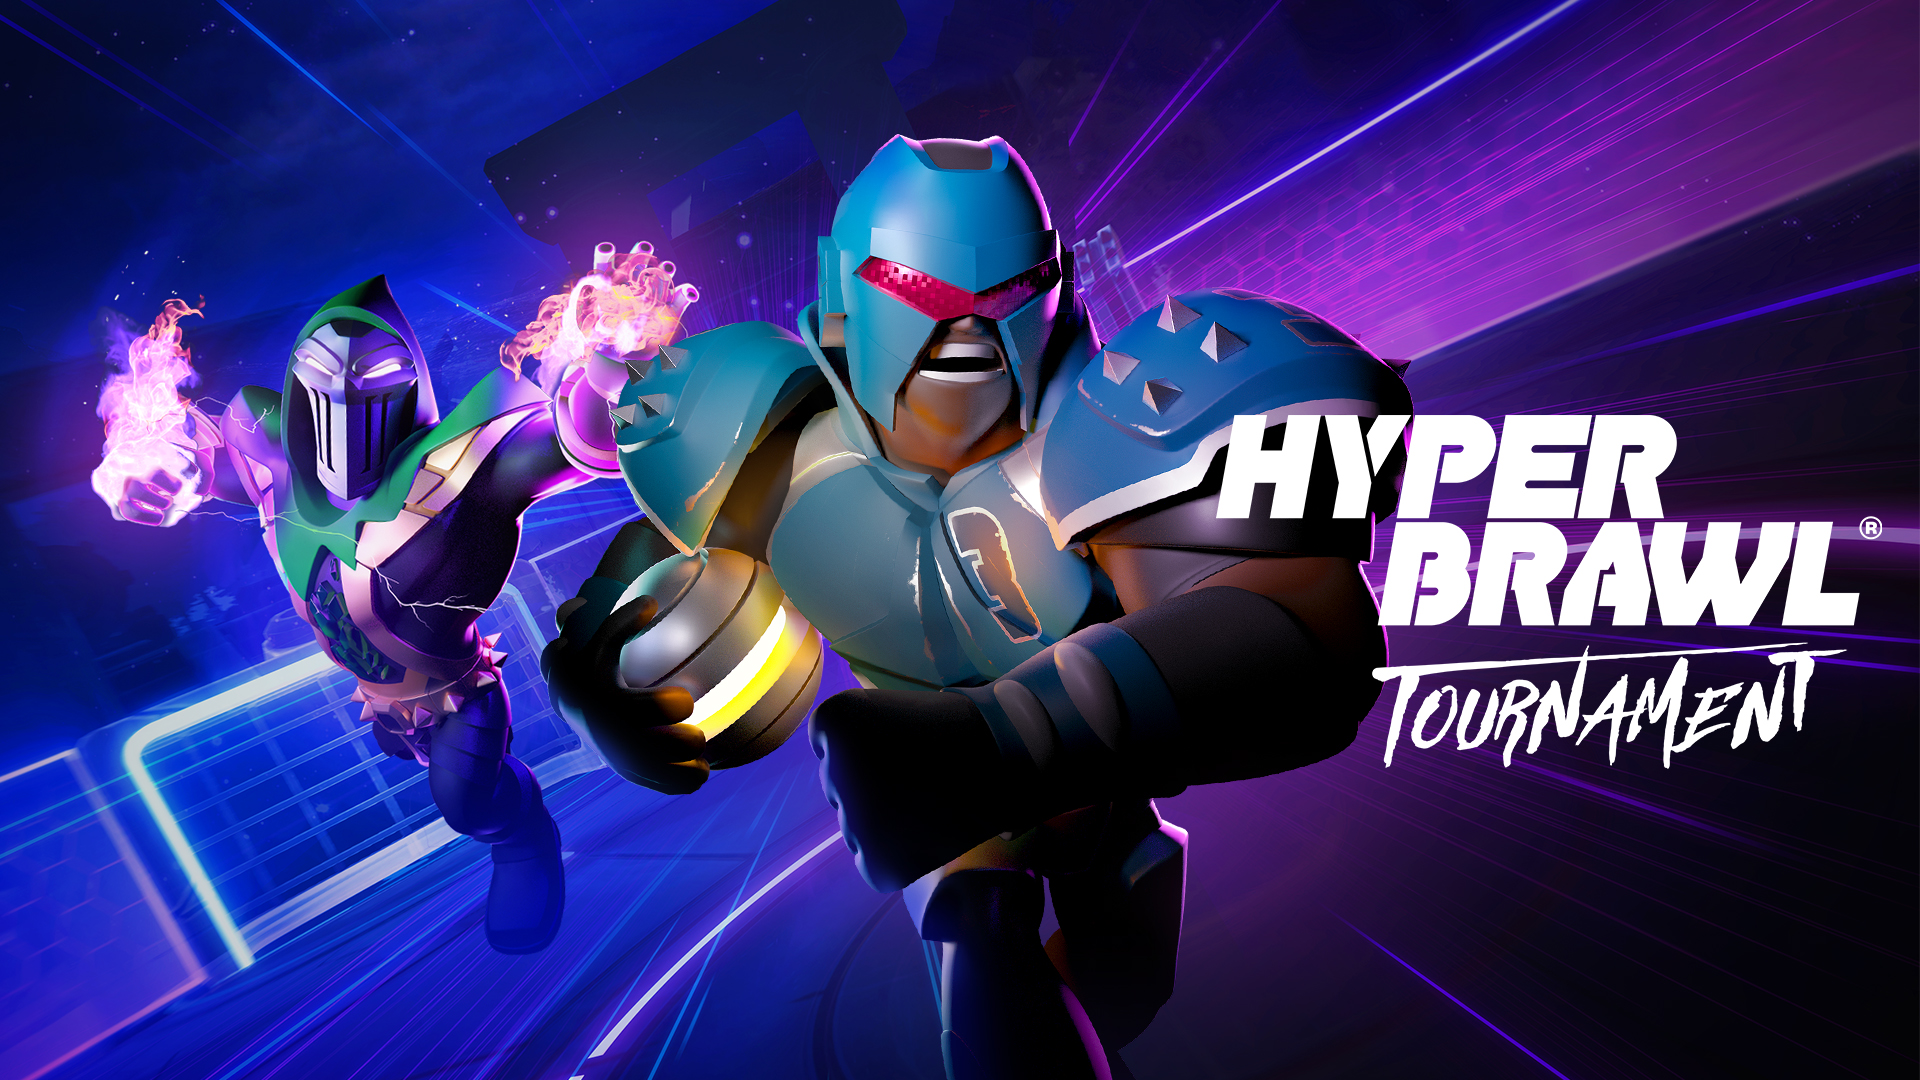 HyperBrawl Tournament is now available for the Nintendo Switch